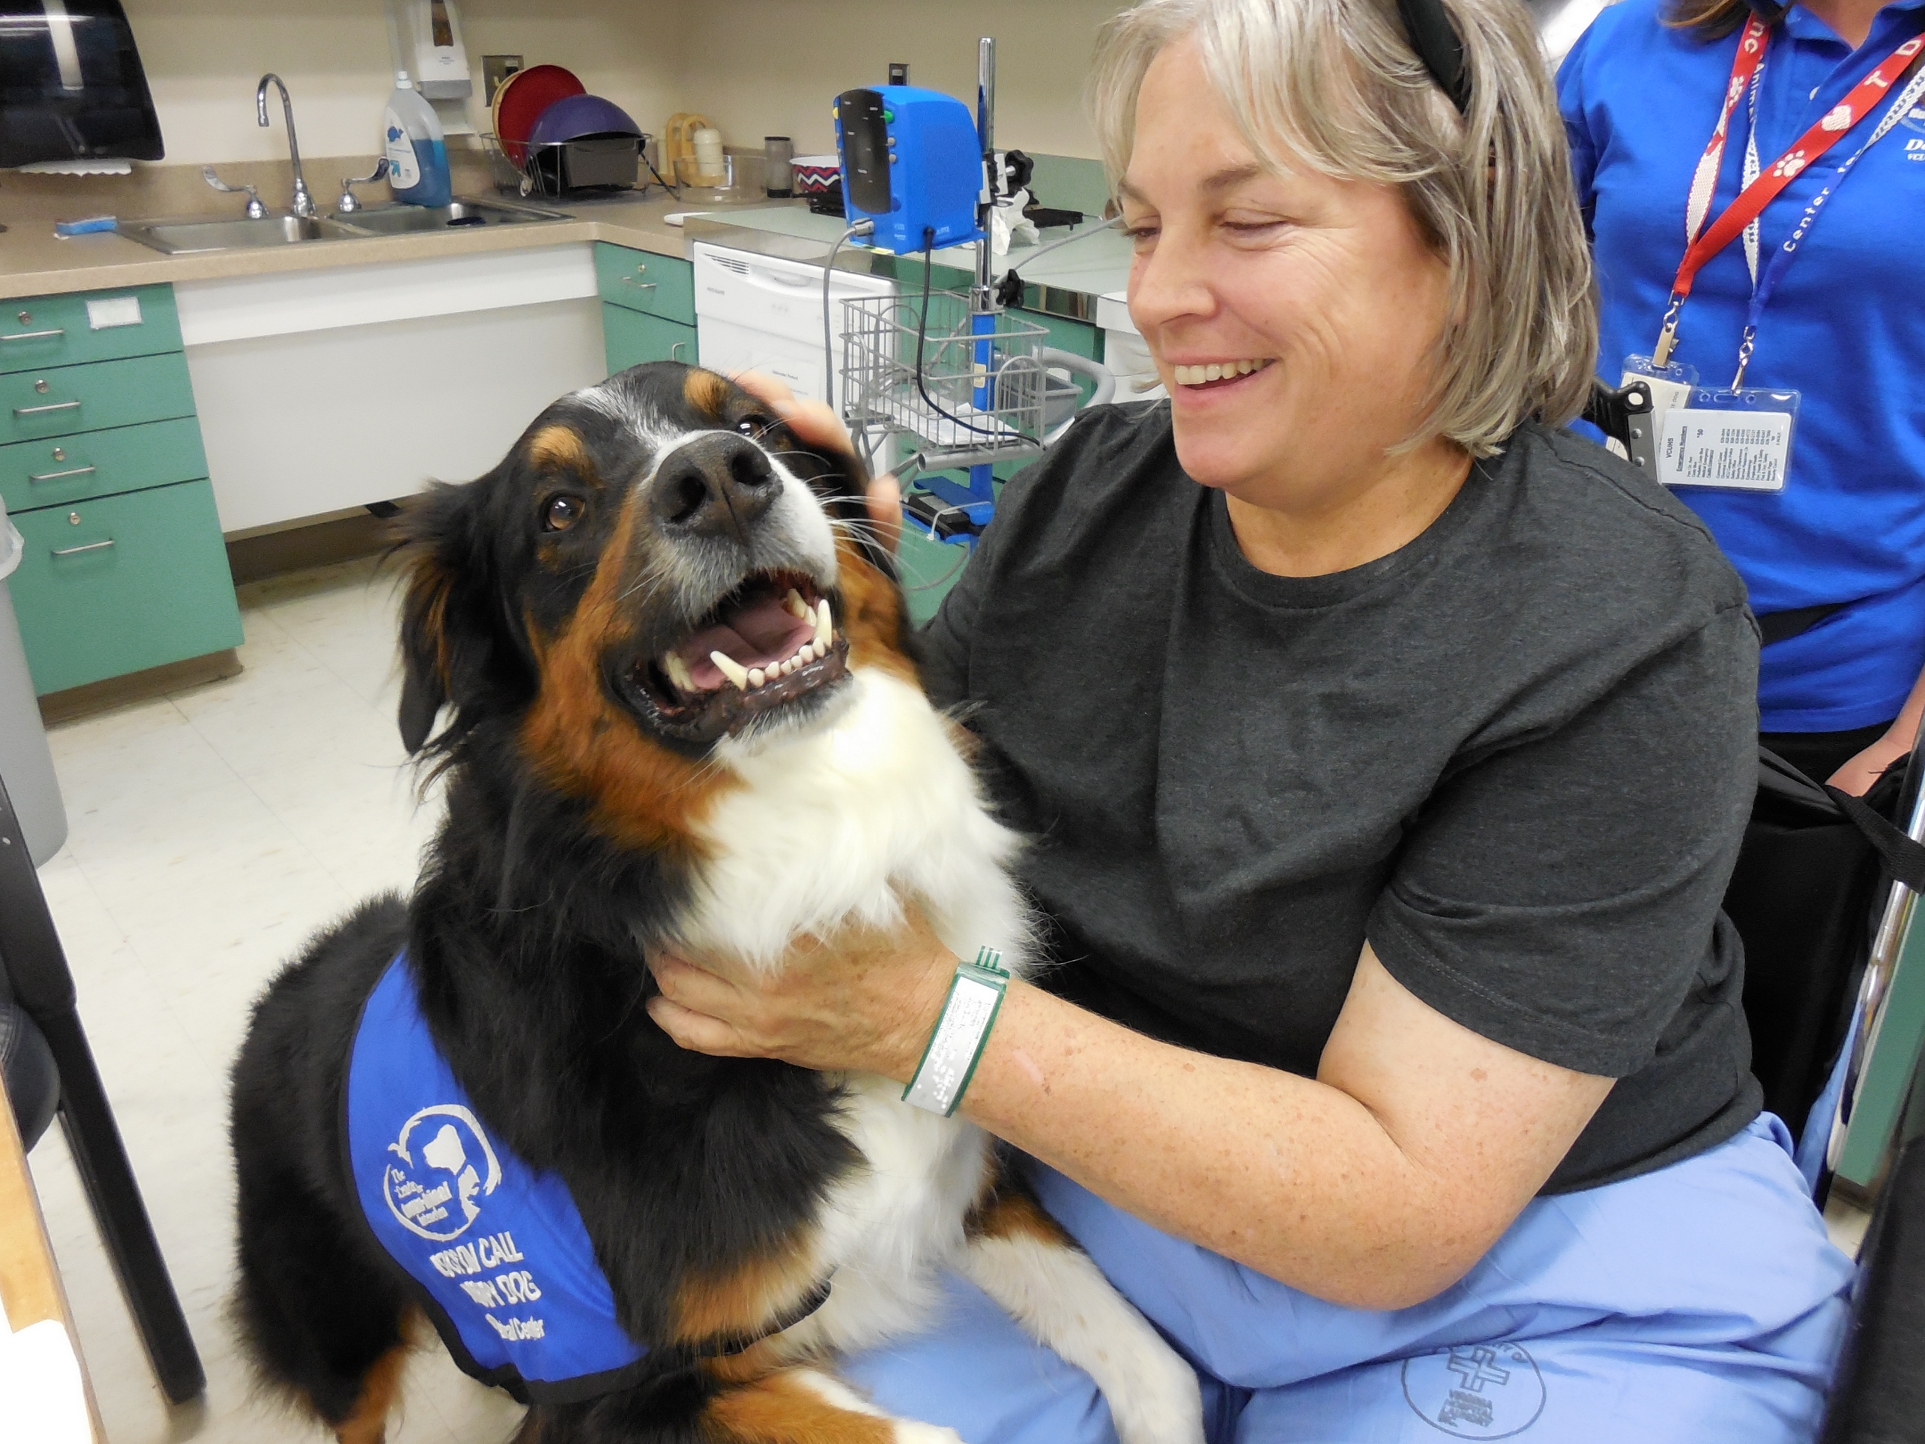 Dogs On Call therapy dog Houdi, an Australian Shepherd with a black, tan and white coat, has his front paws resting on a chair with a patient who is smiling and rubbing Houdi's chest. Houdi is smiling.  